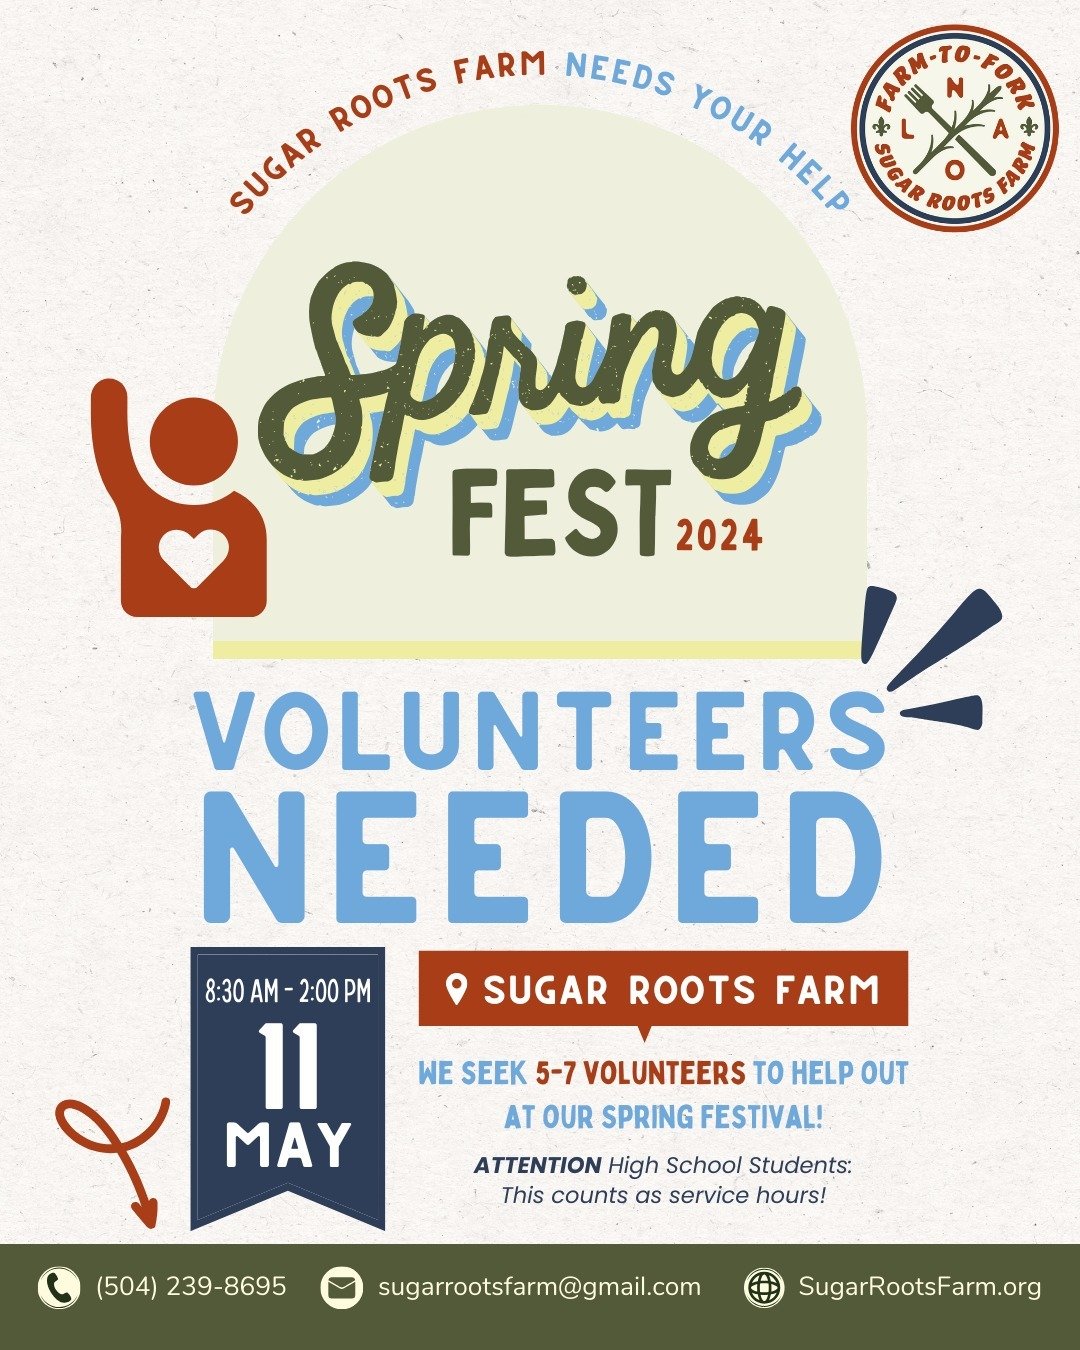 Volunteer Opportunity! We seek 5-7 volunteers to help out at our Spring Festival on Saturday, May 11th, from 8:30 a.m. to 2 p.m.
Get your perks! This includes FREE honey and fresh farm eggs for all volunteers.
(Attention High Schoolers: this counts a